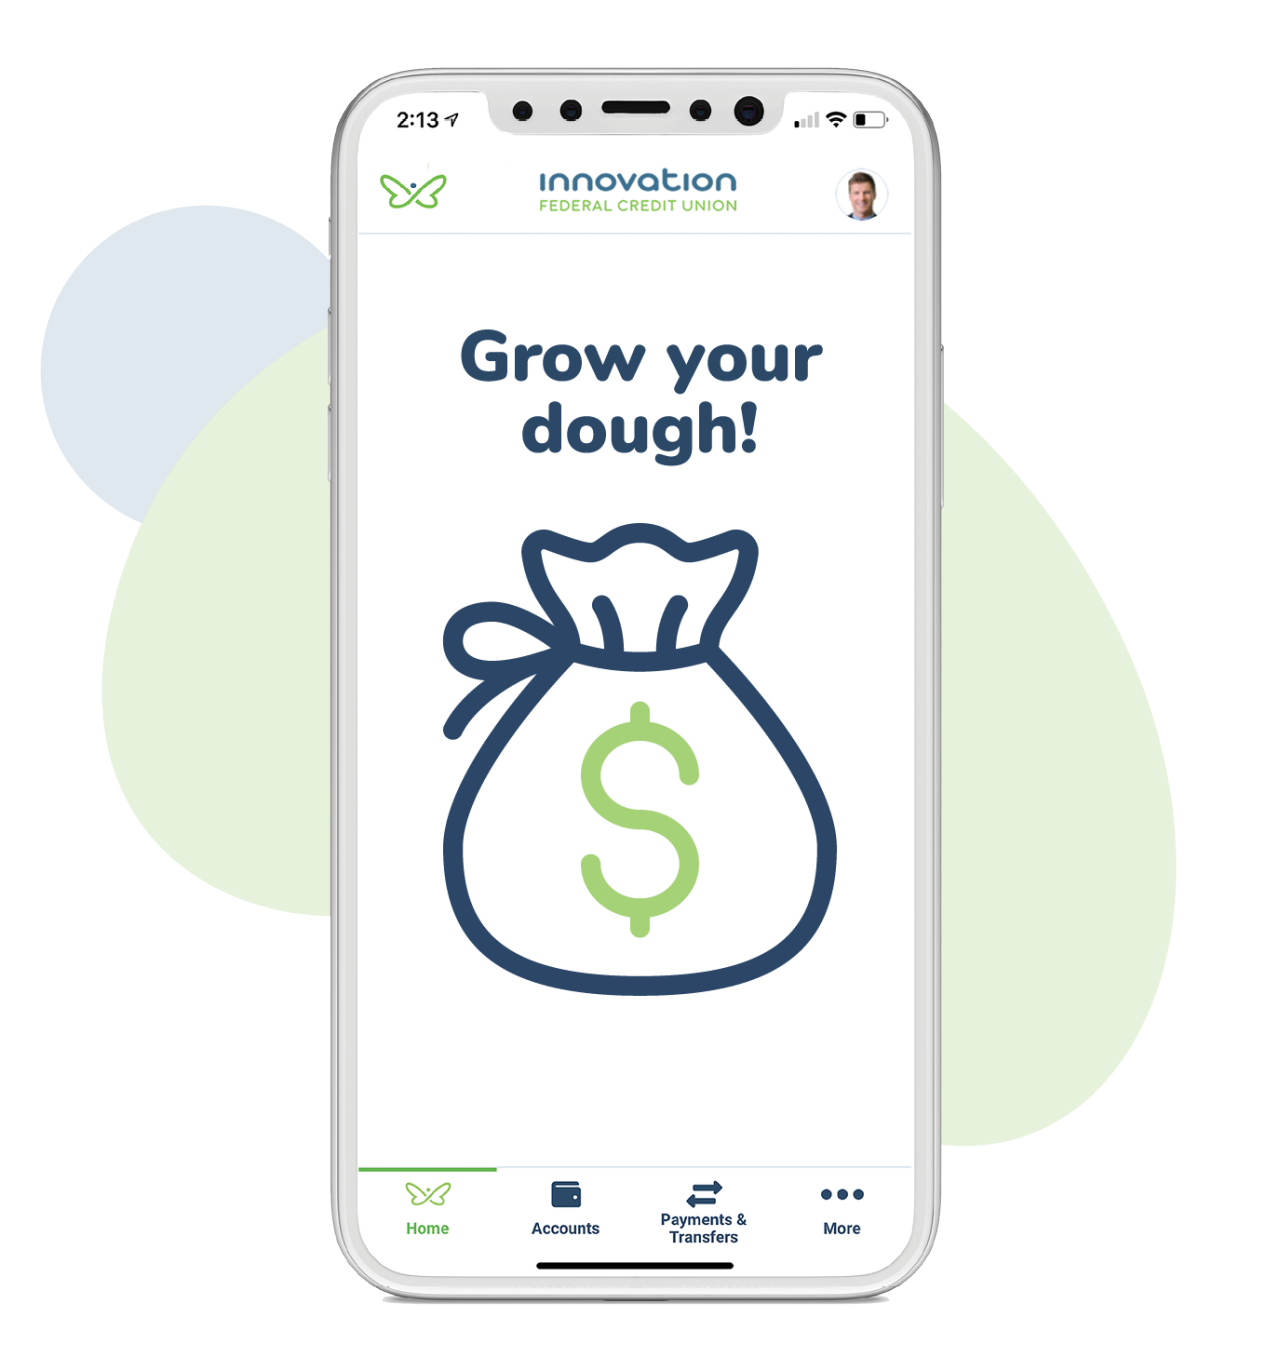 Mobile phone displaying an Innovation app screen:  "Grow your dough!" and a money bag icon.